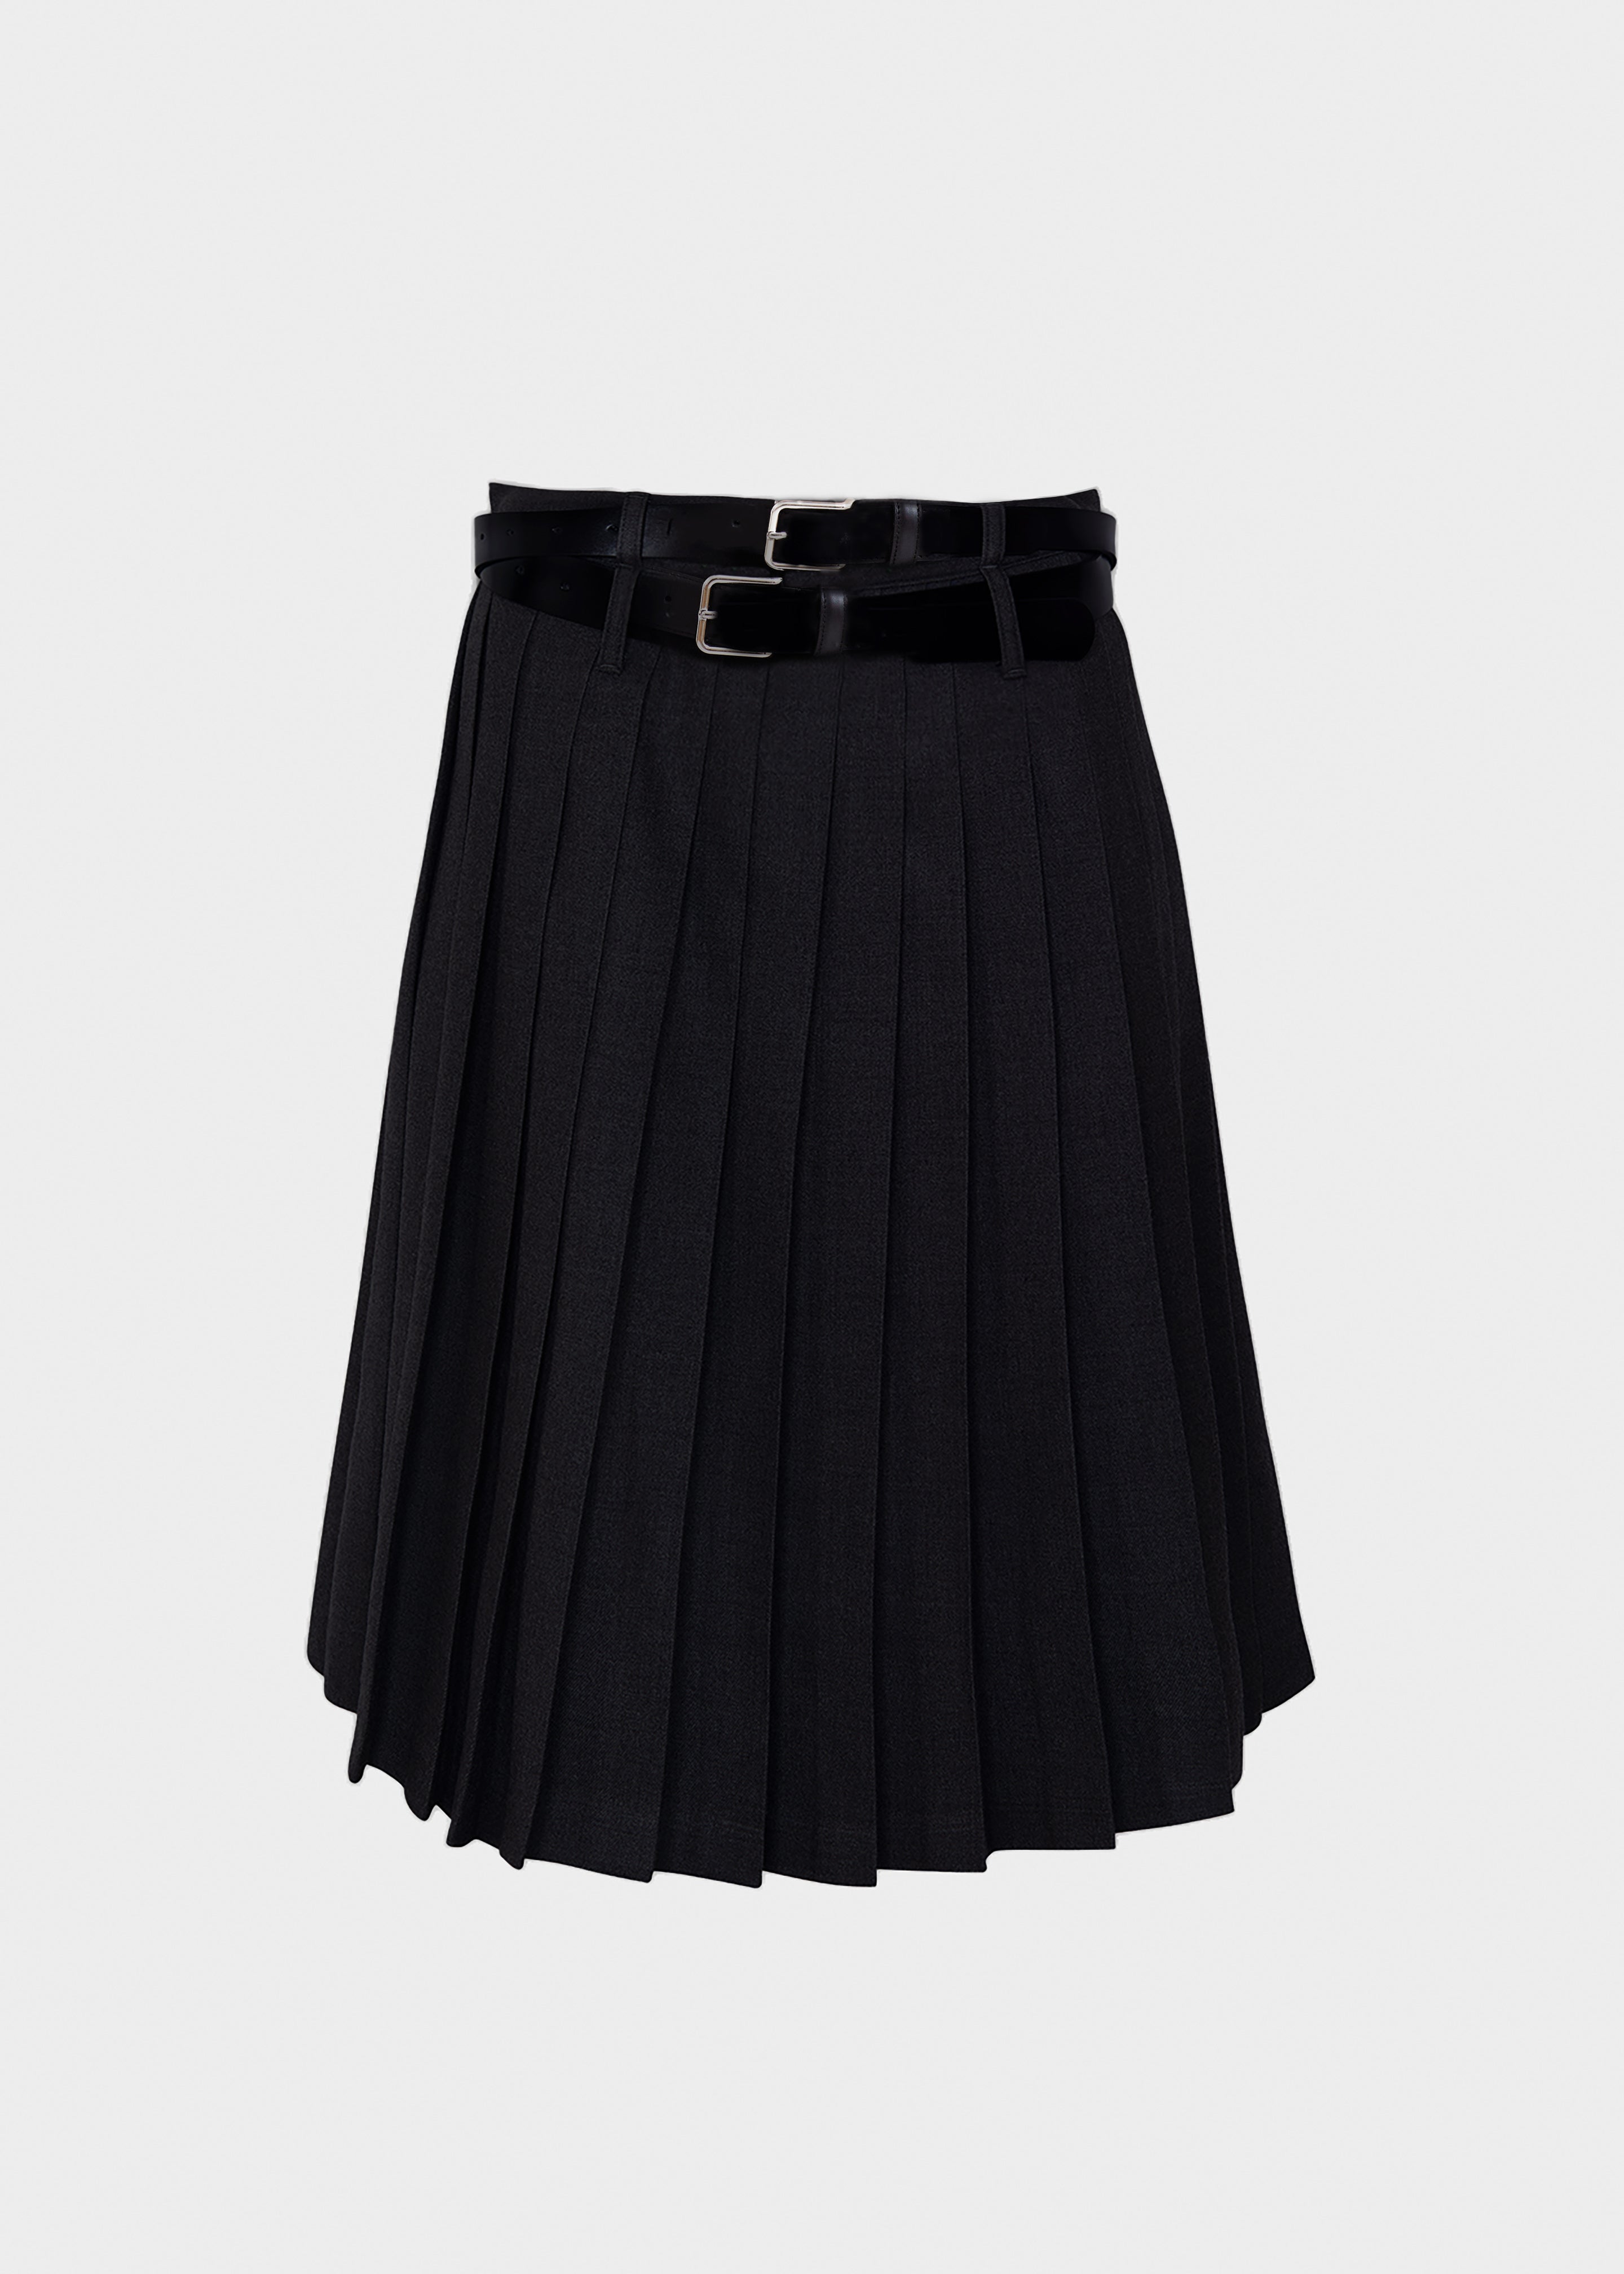 Wednesday Belted Pleated Skirt - Black - 12